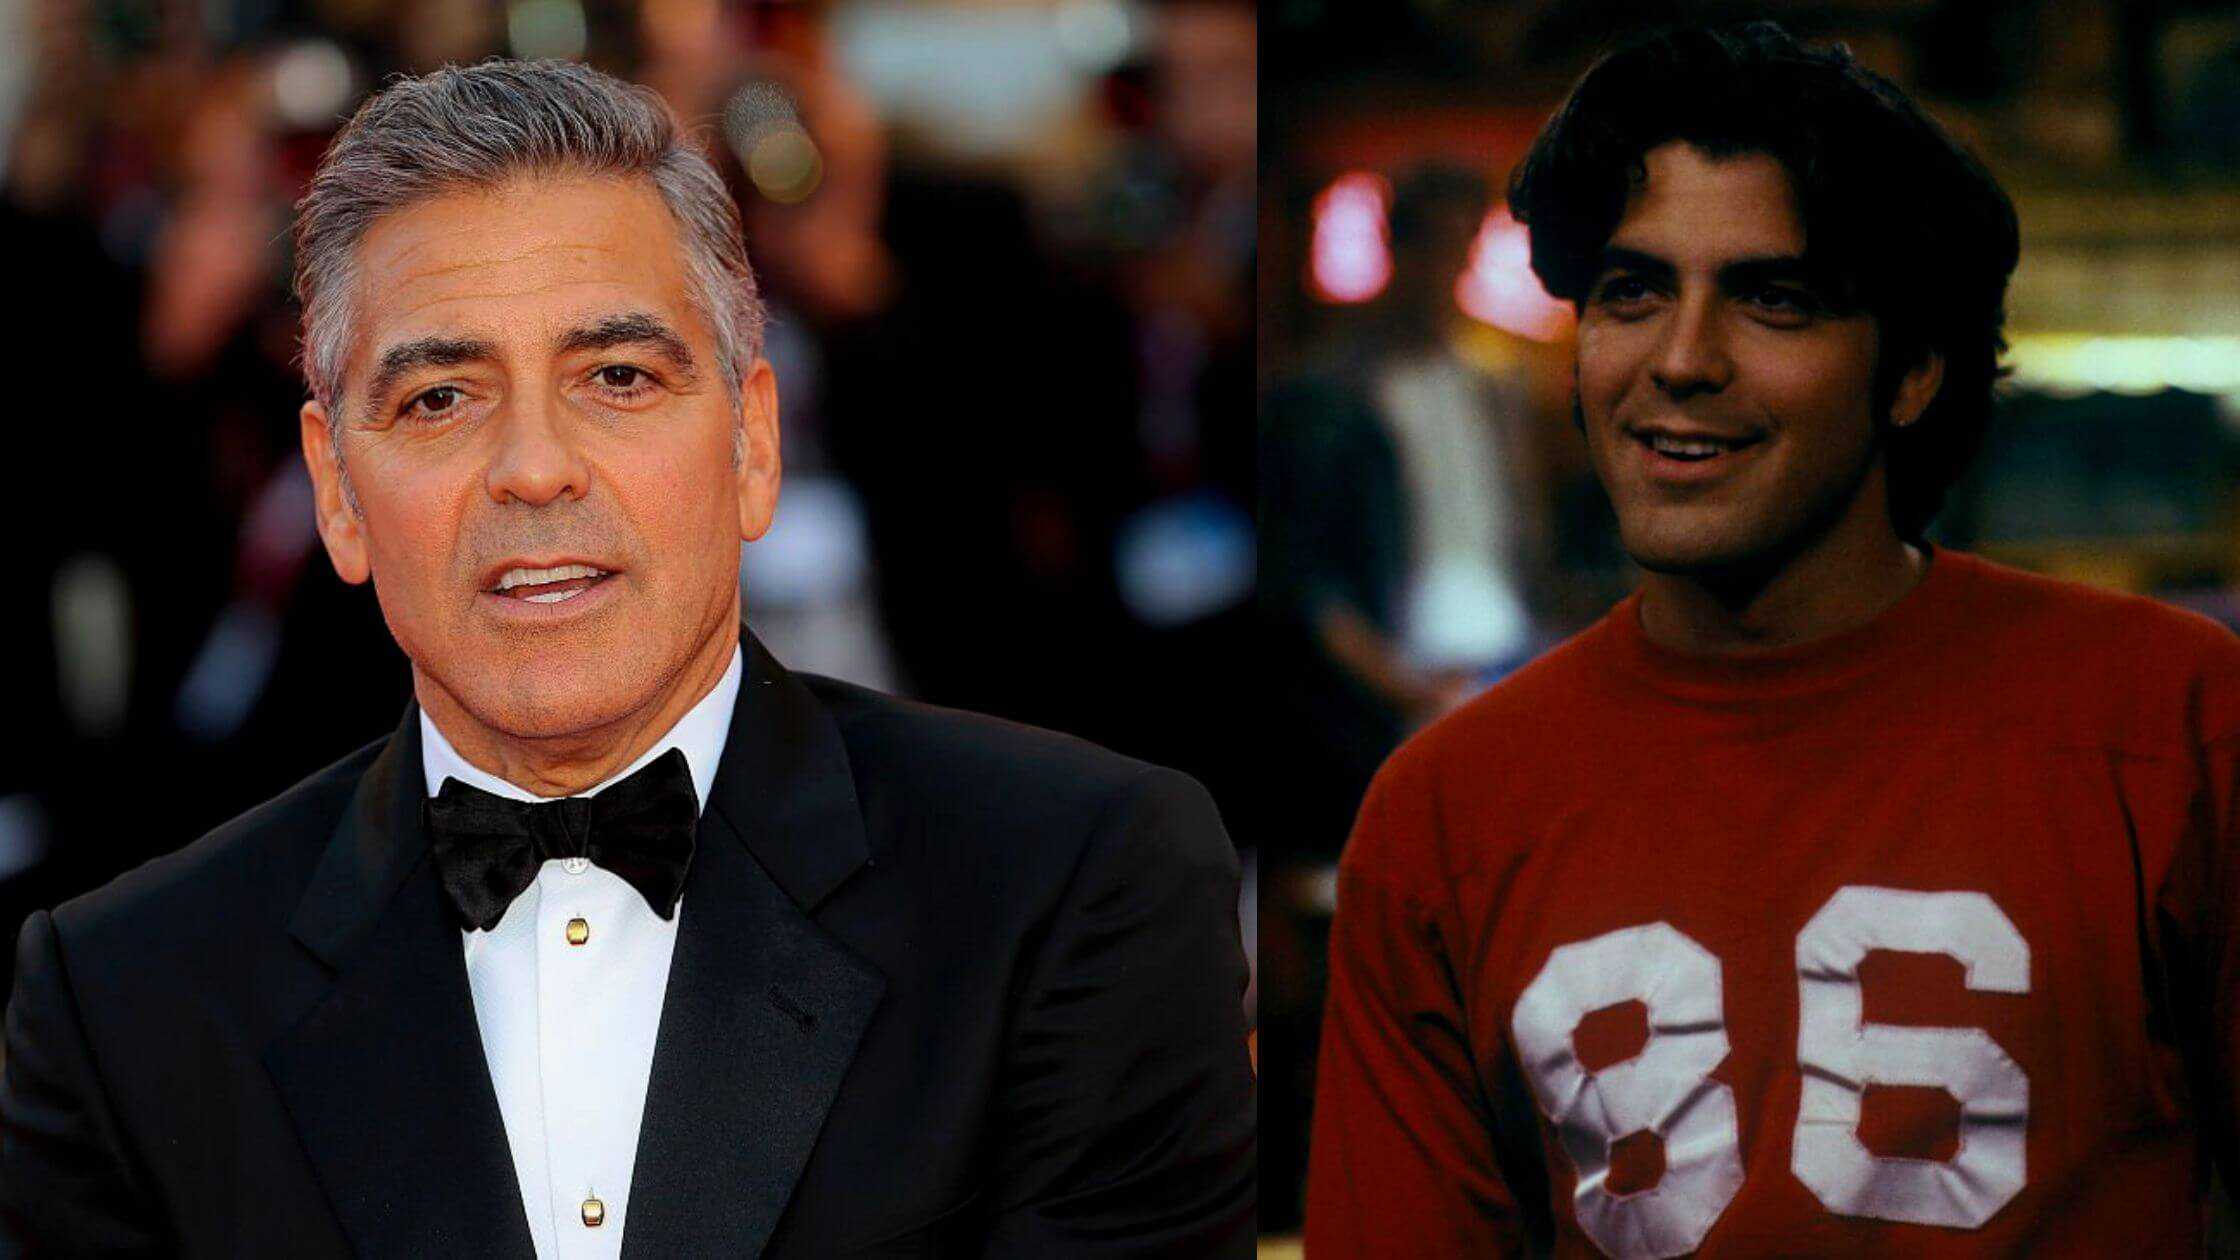 George Clooney Says He Felt Objectified In His Early Roles